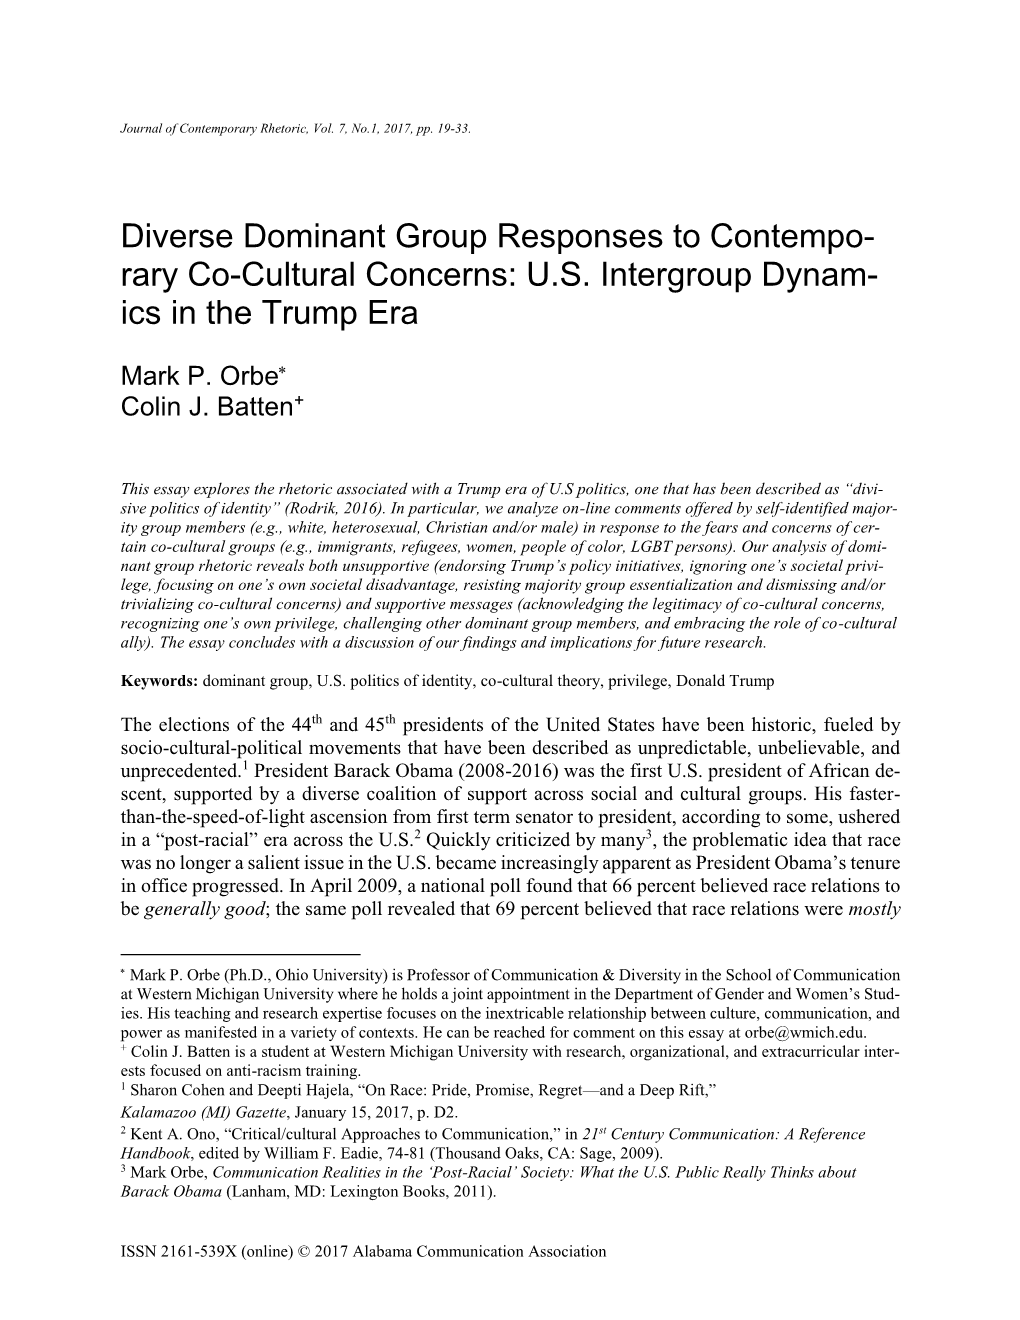 Diverse Dominant Group Responses to Contemporary Co-Cultural